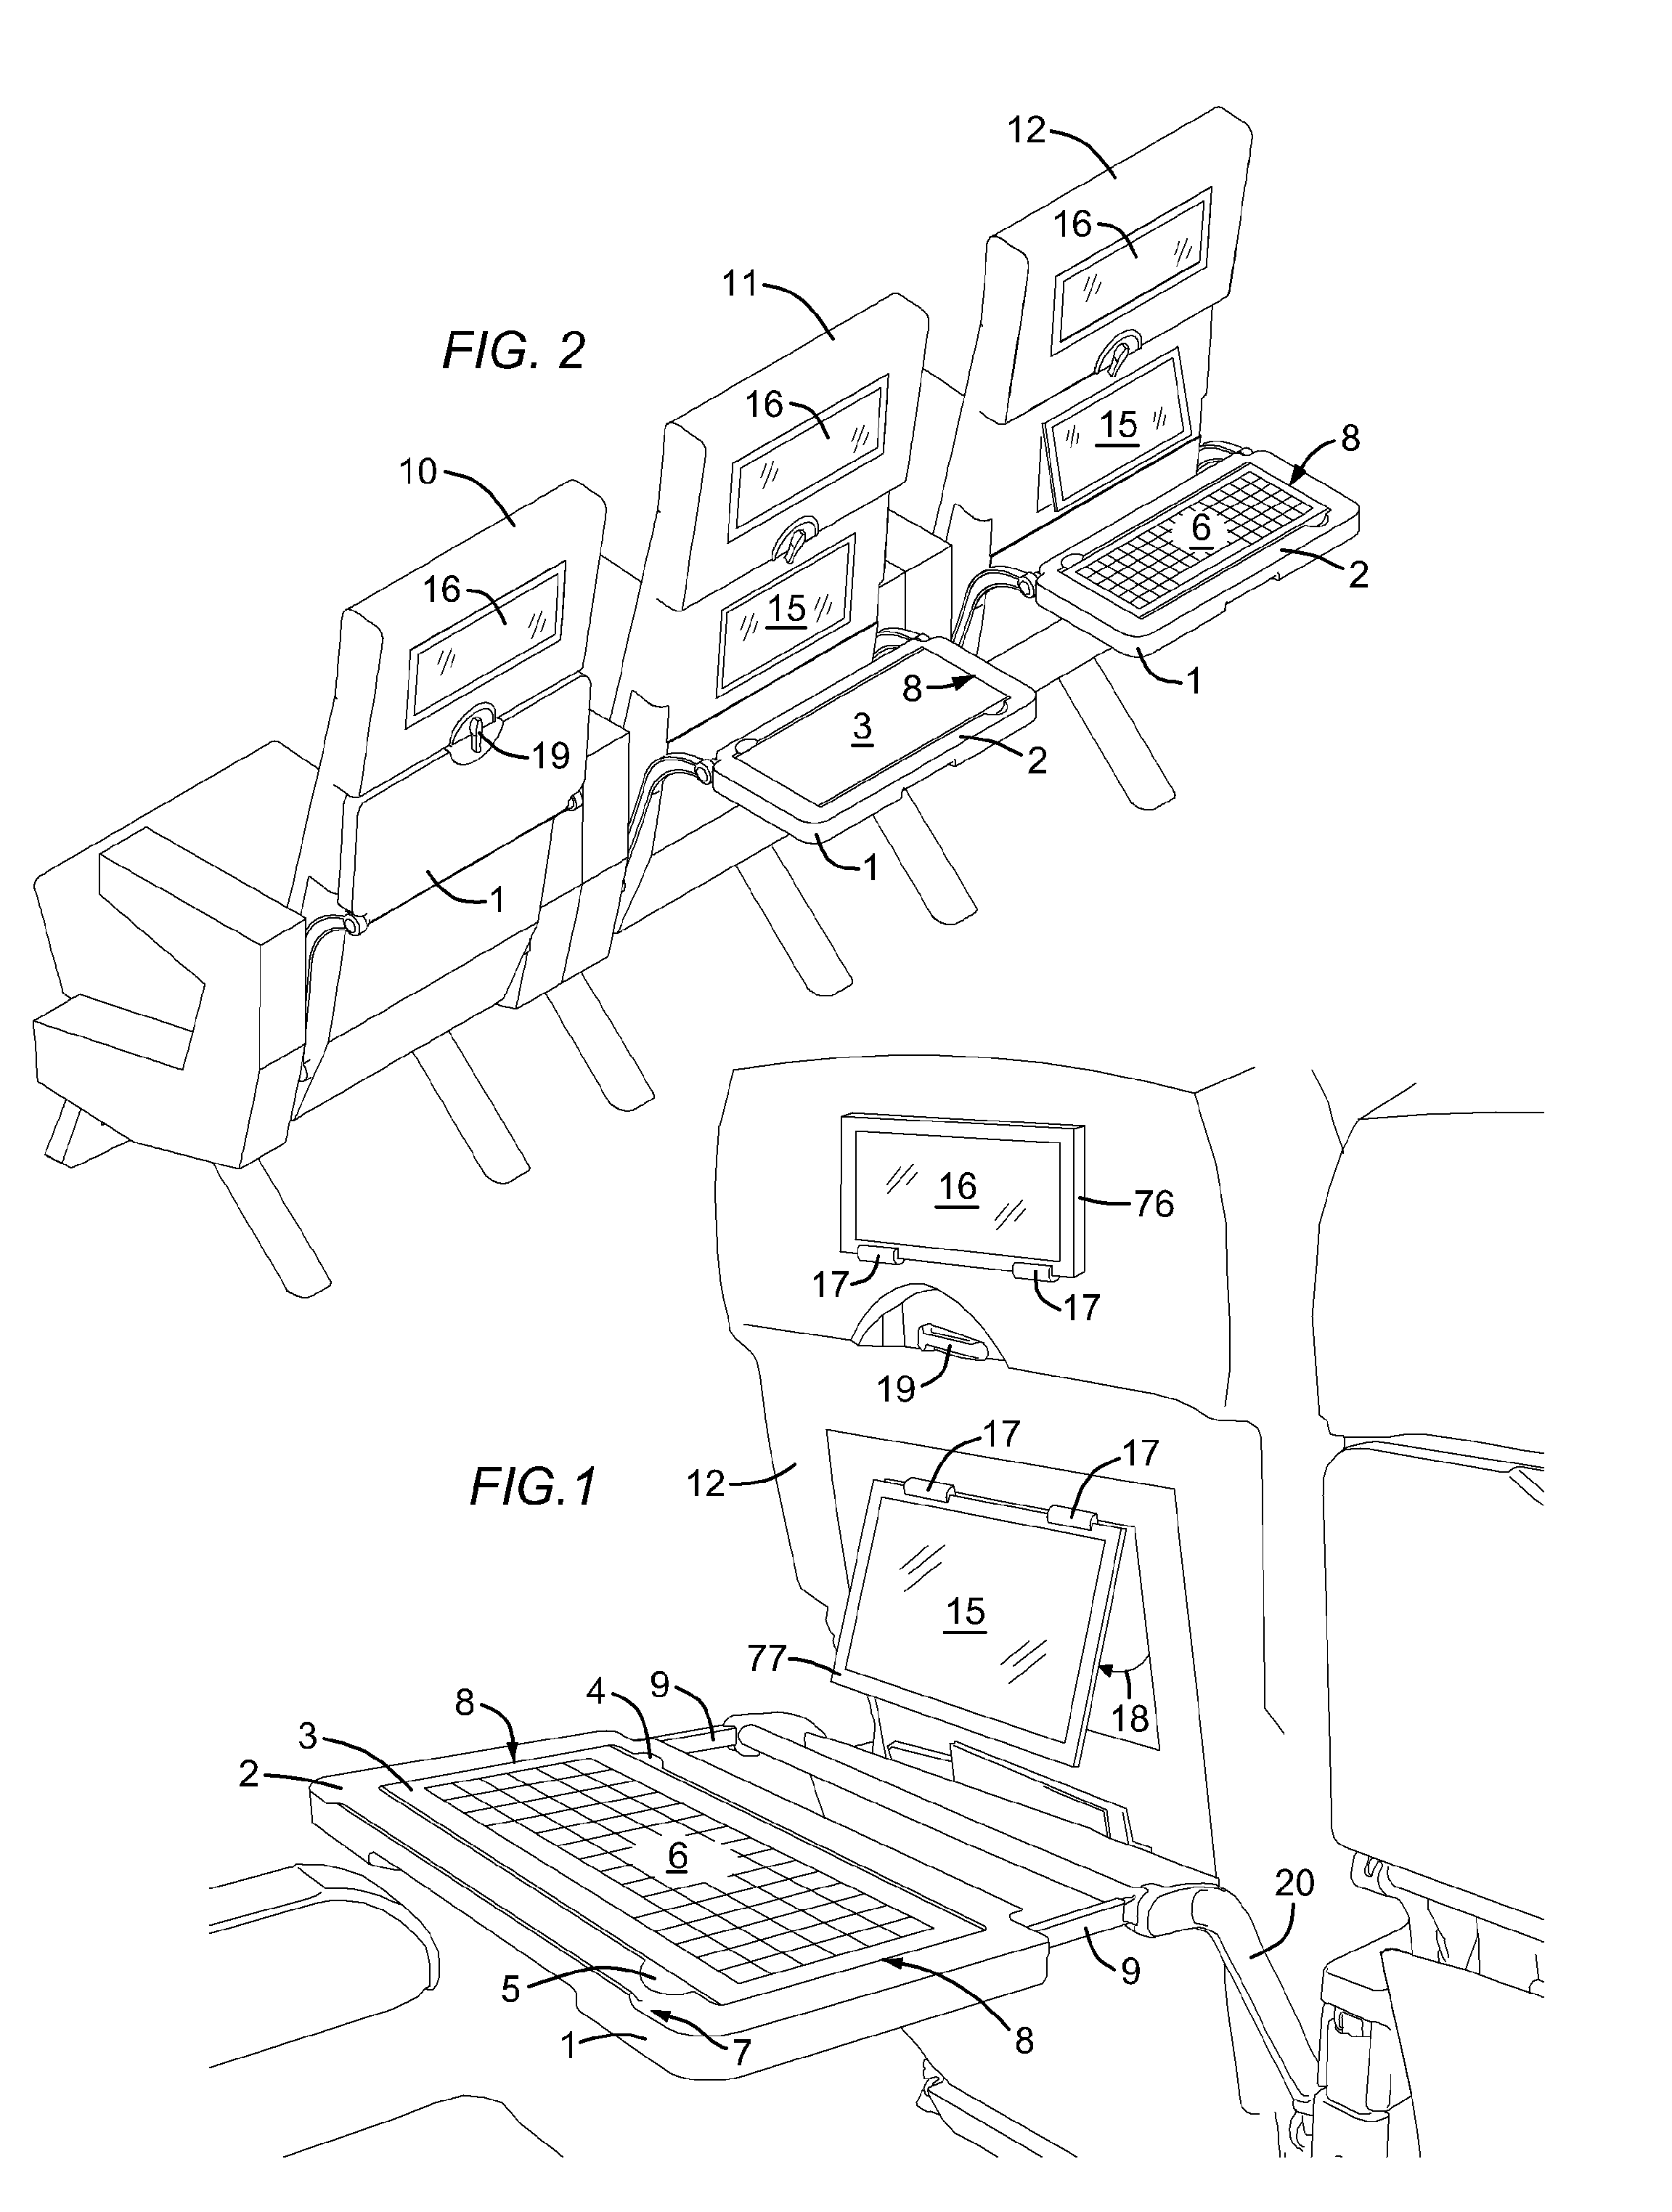 Passenger keyboard and display apparatus, and a system and method for delivering content to users of such apparatus